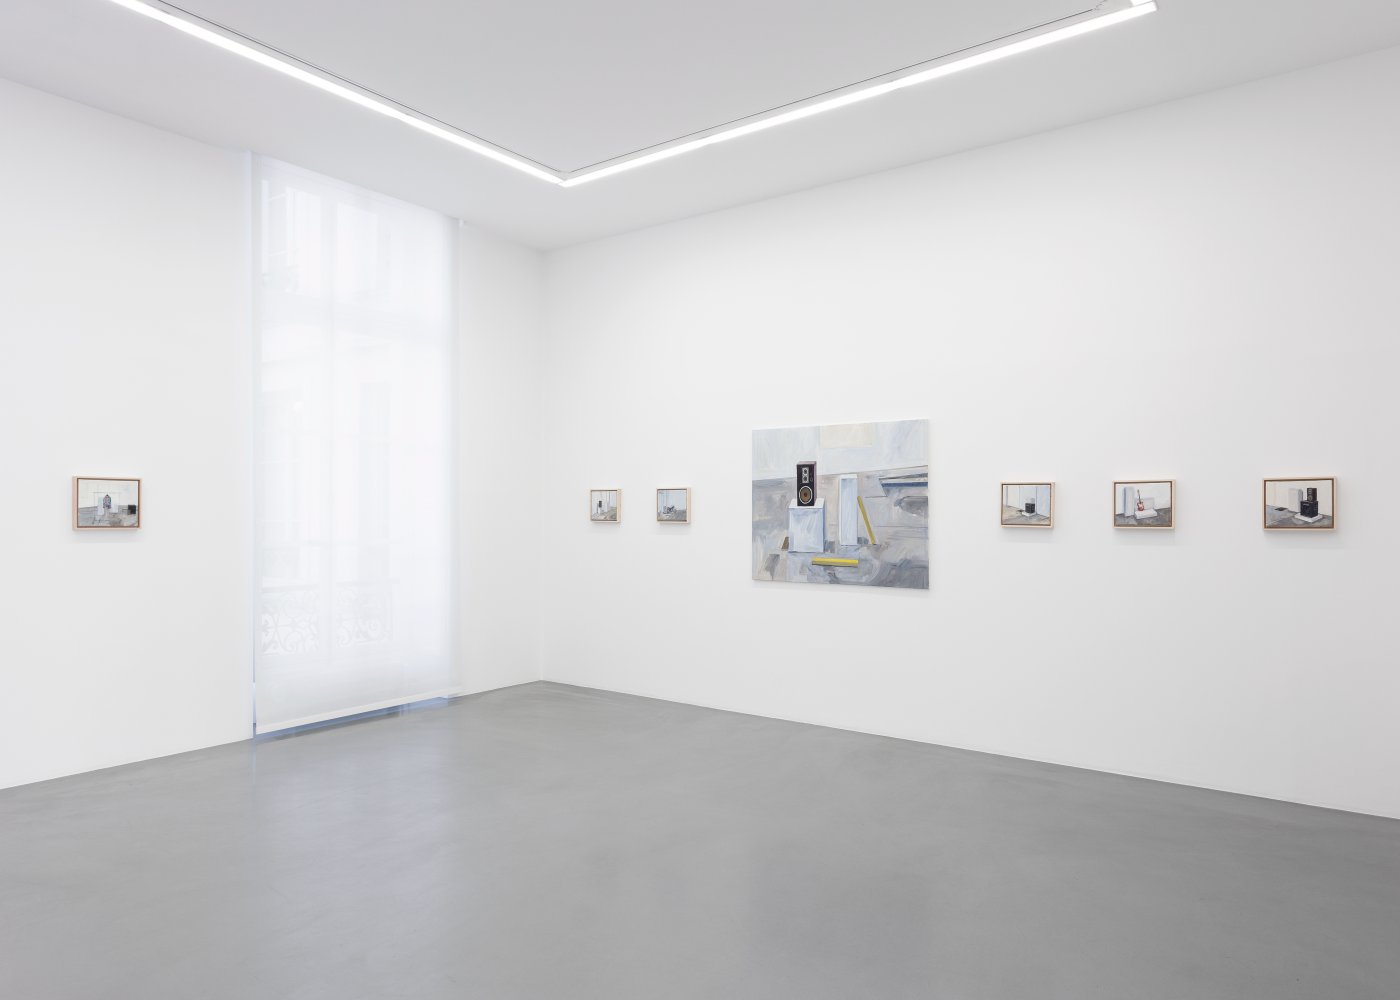 Installation image for Dwellers Part II, at Perrotin